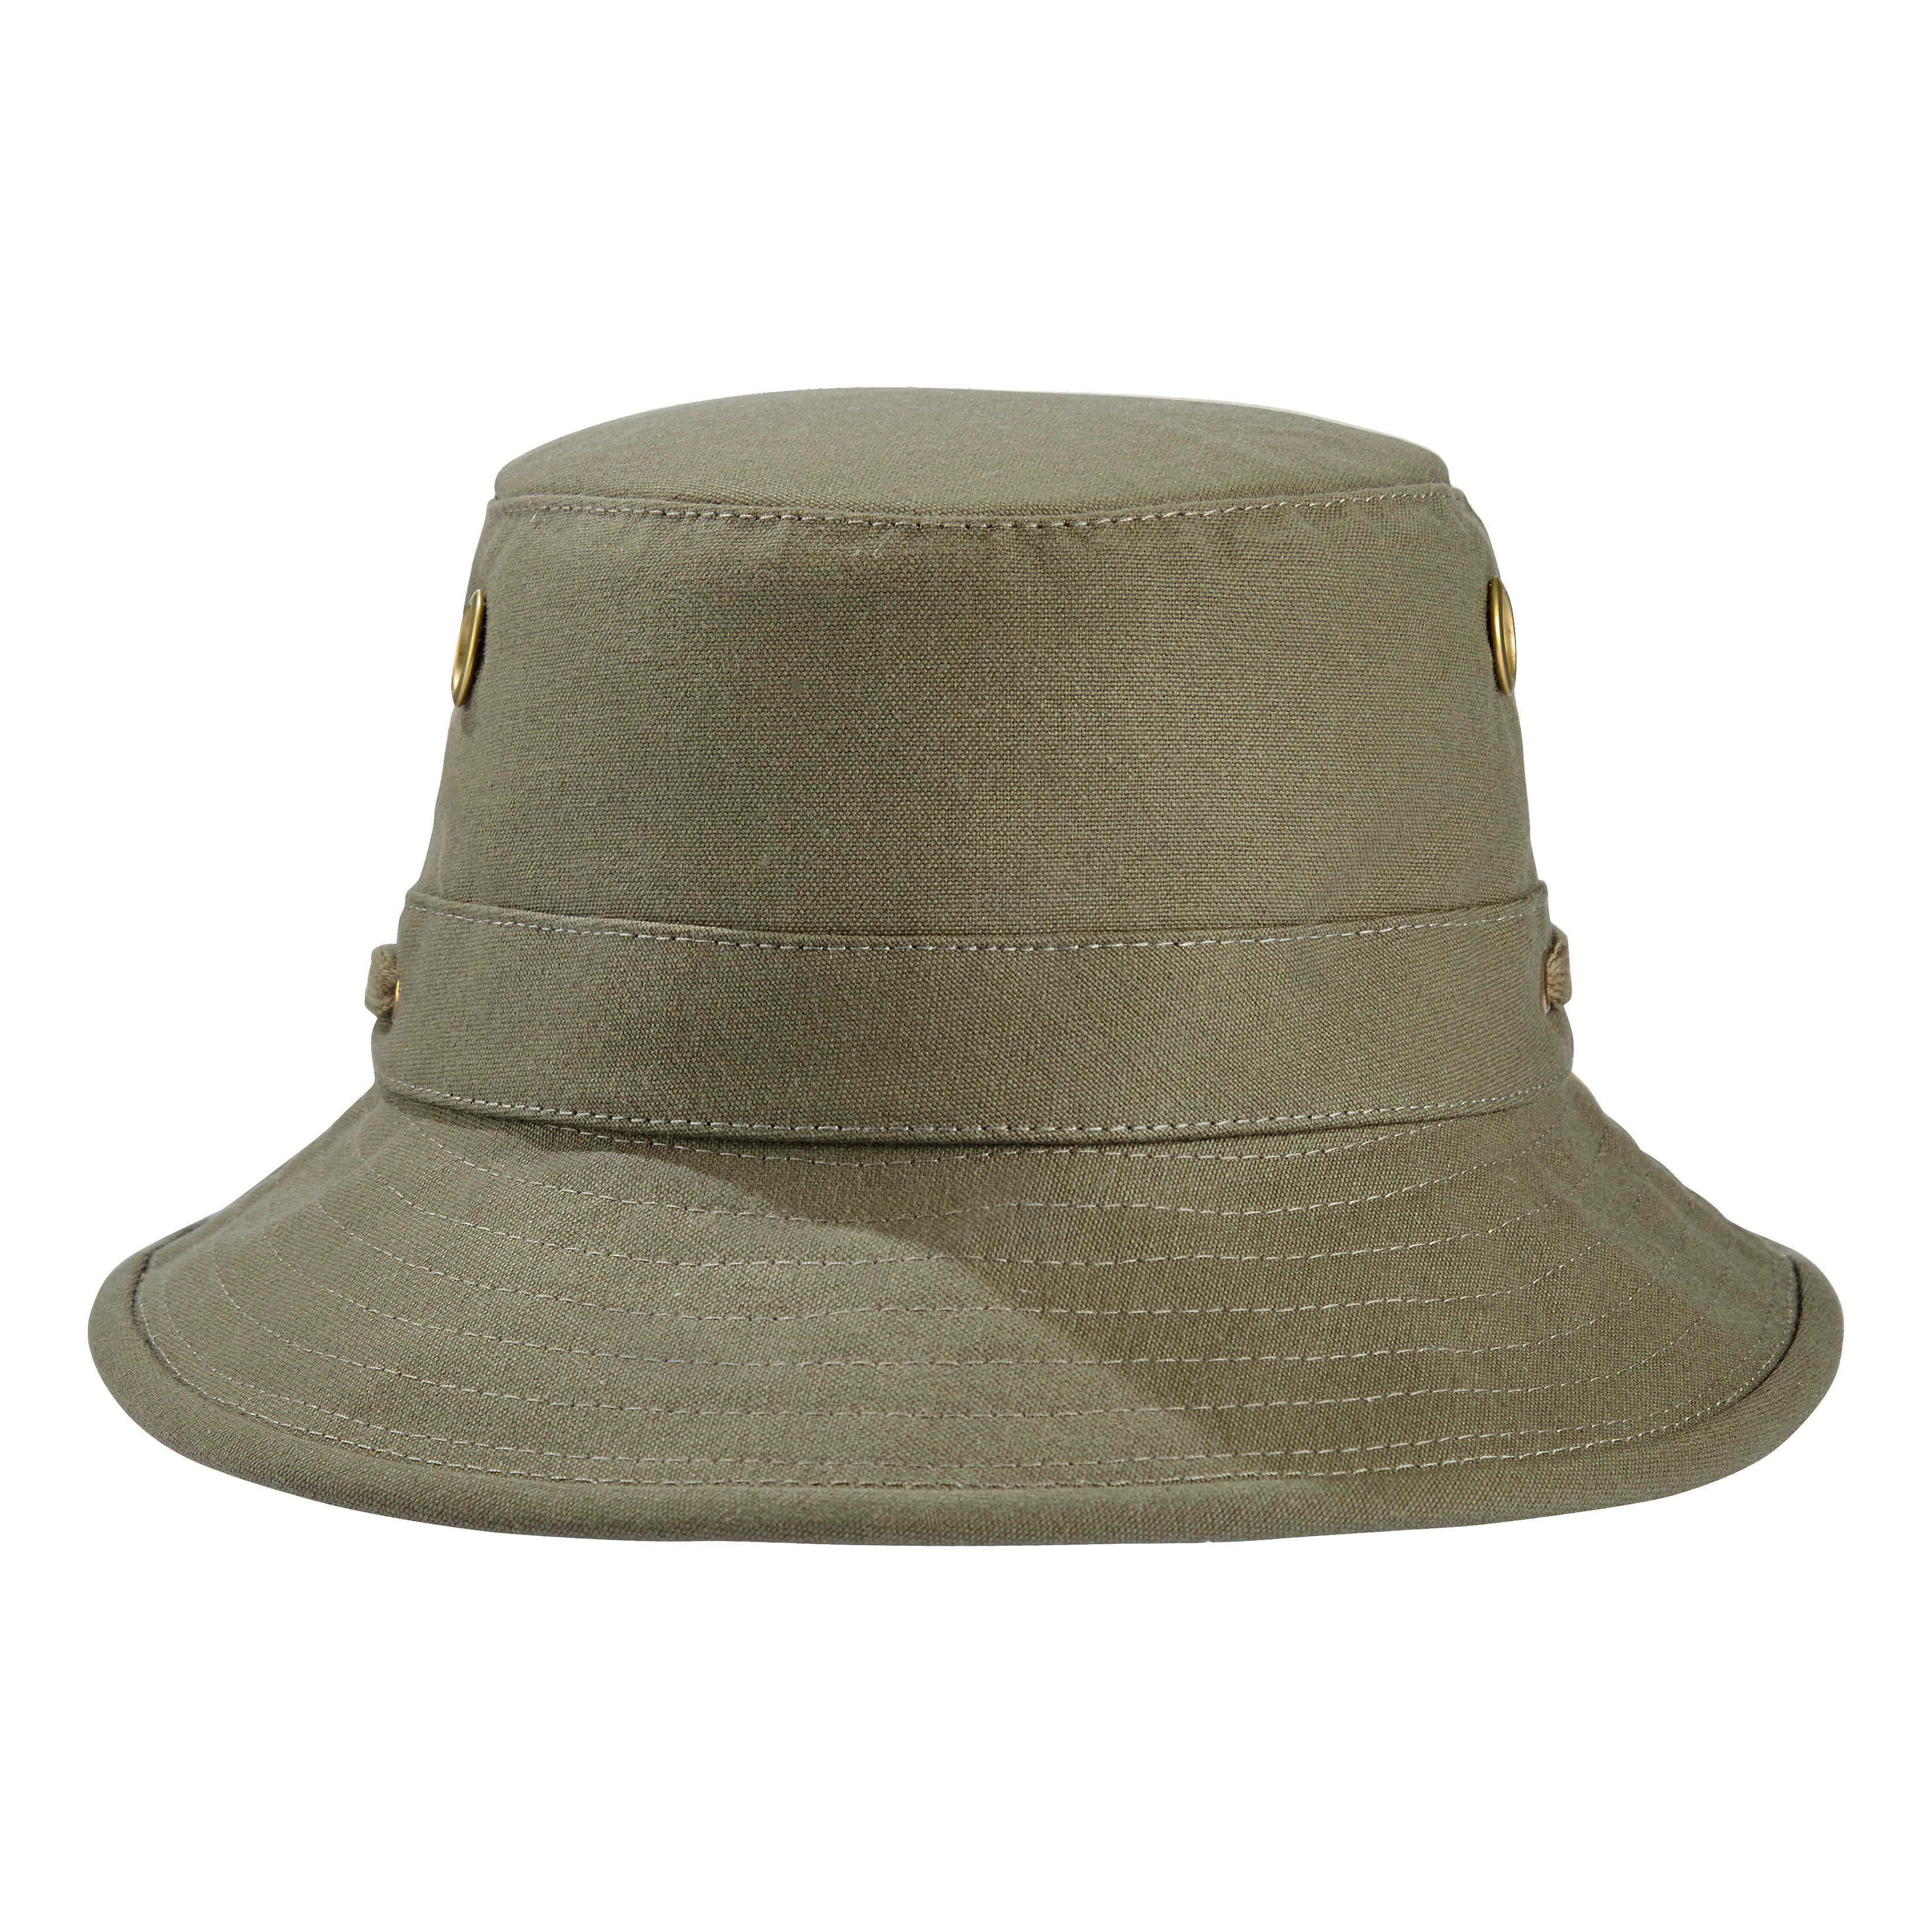 Tilley Iconic T1 Bucket Hat - Olive - 7 5/8